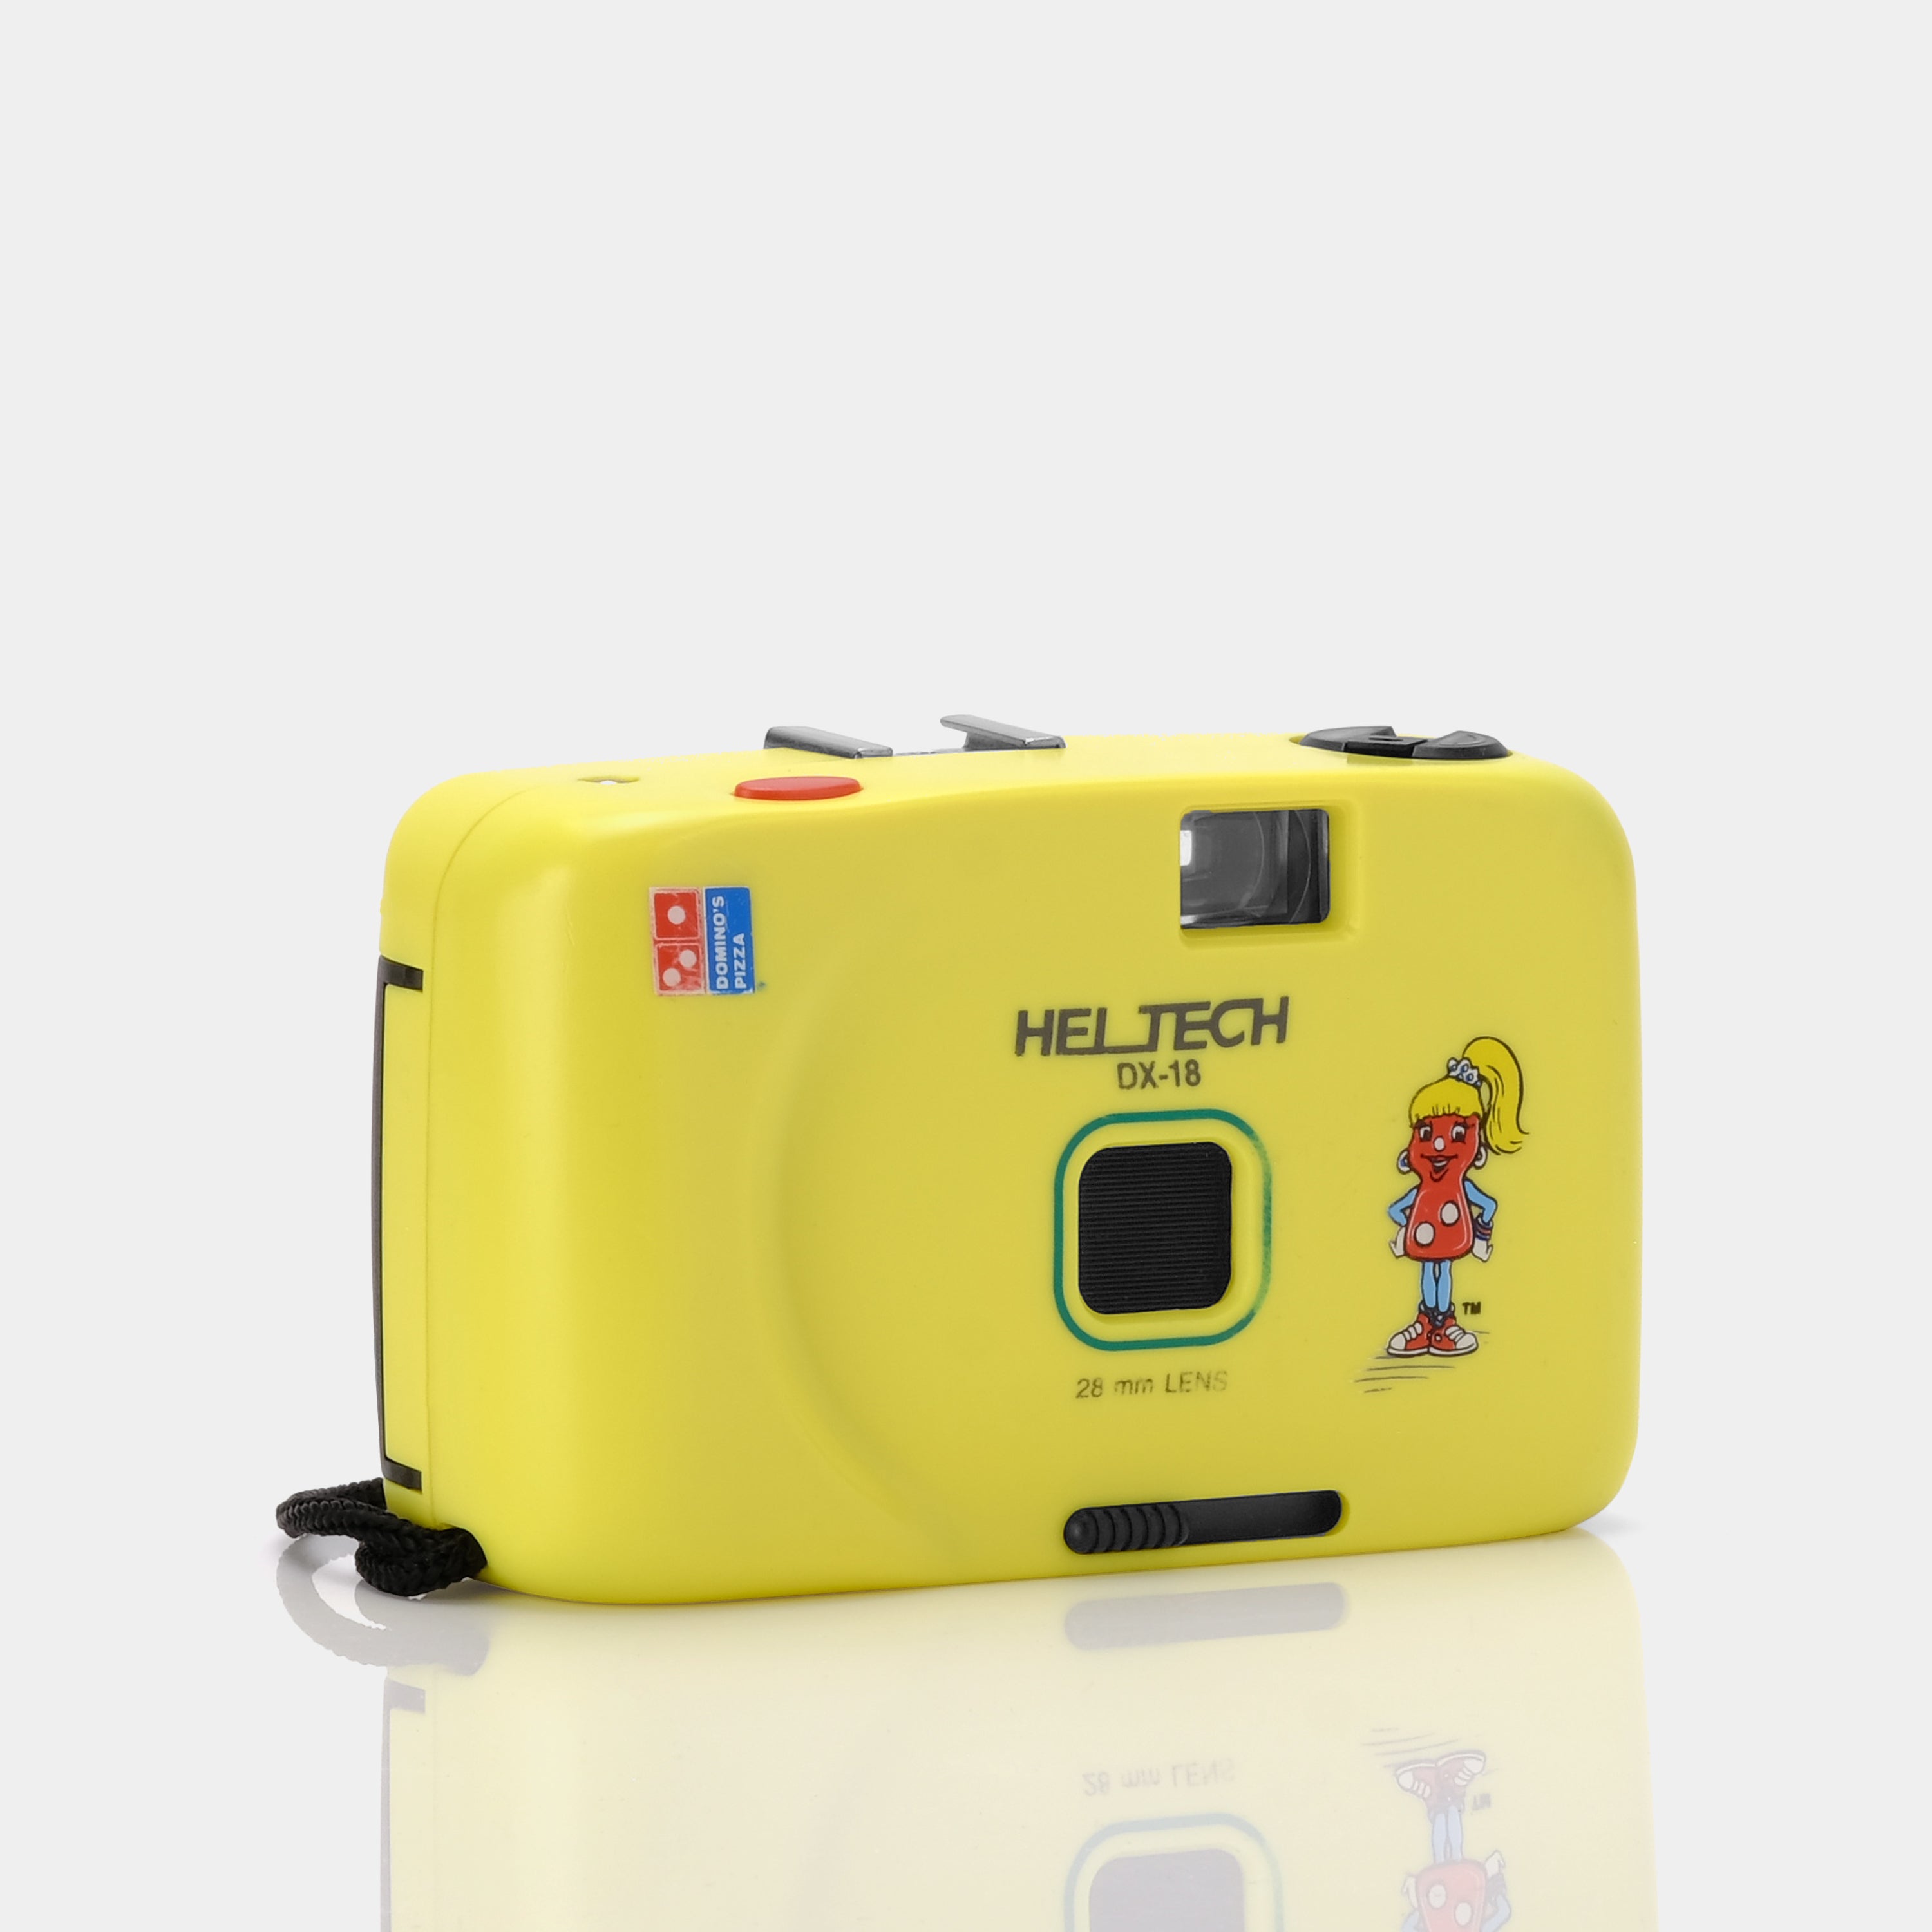 Heltech DX-18 Domino's Pizza 35mm Point And Shoot Film Camera